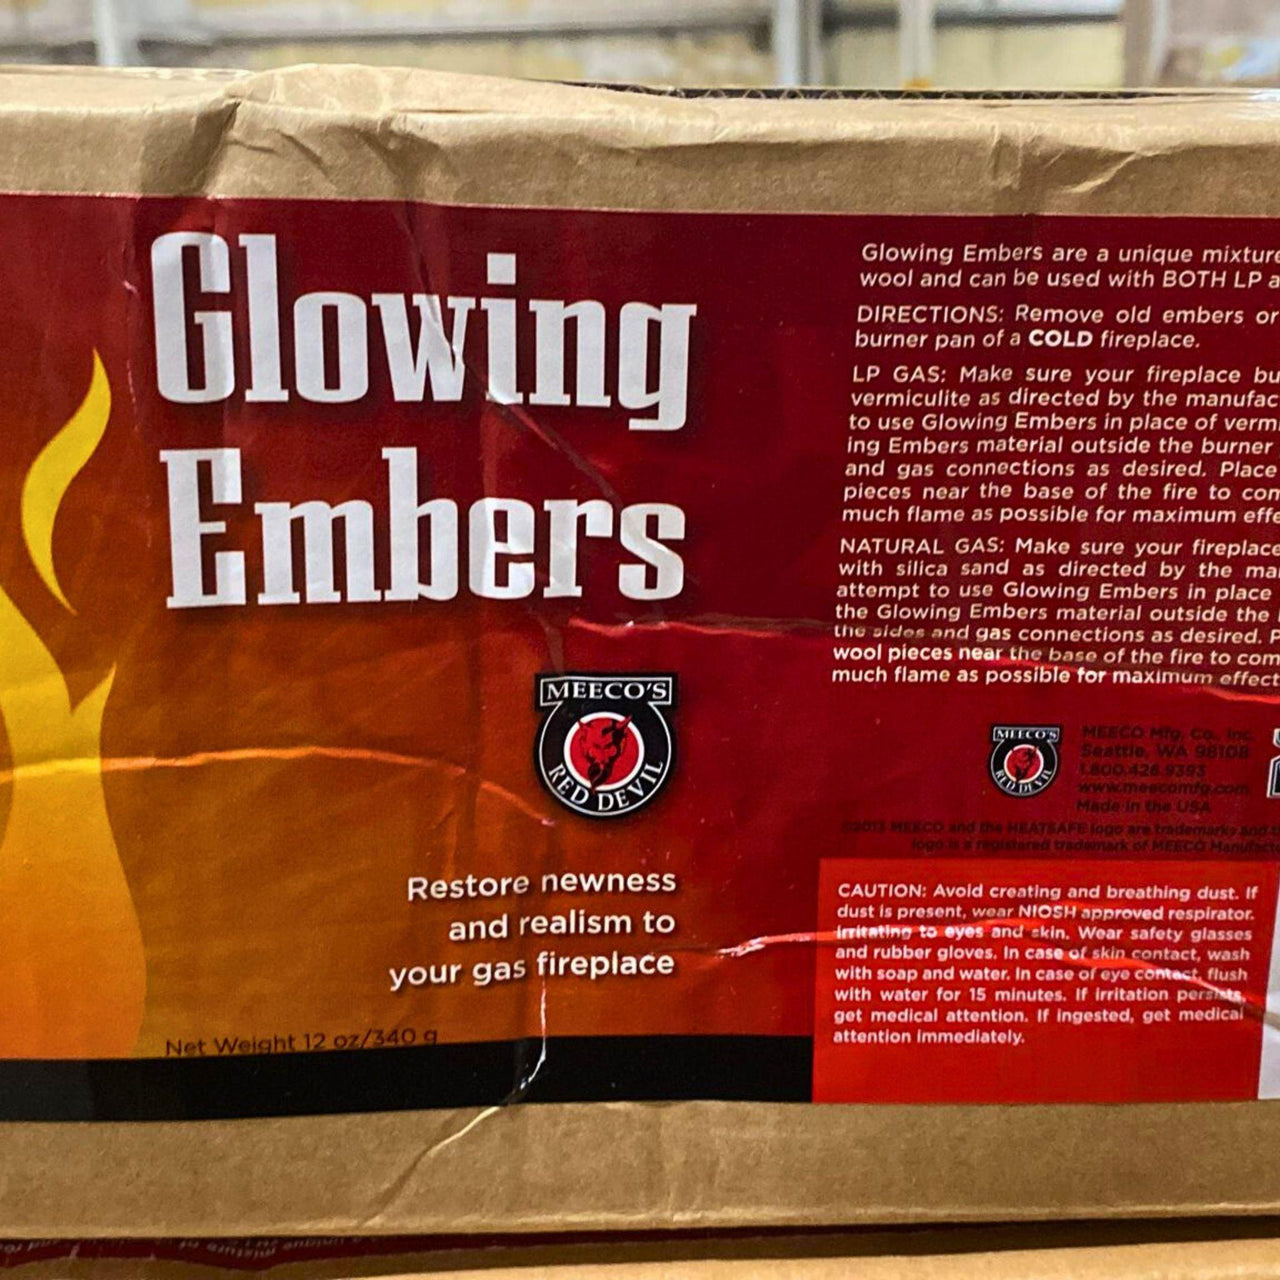 Glowing Embers Unique Mixture of Vermiculite and Rock Wool 12OZ (29 Pcs Lot) - Discount Wholesalers Inc